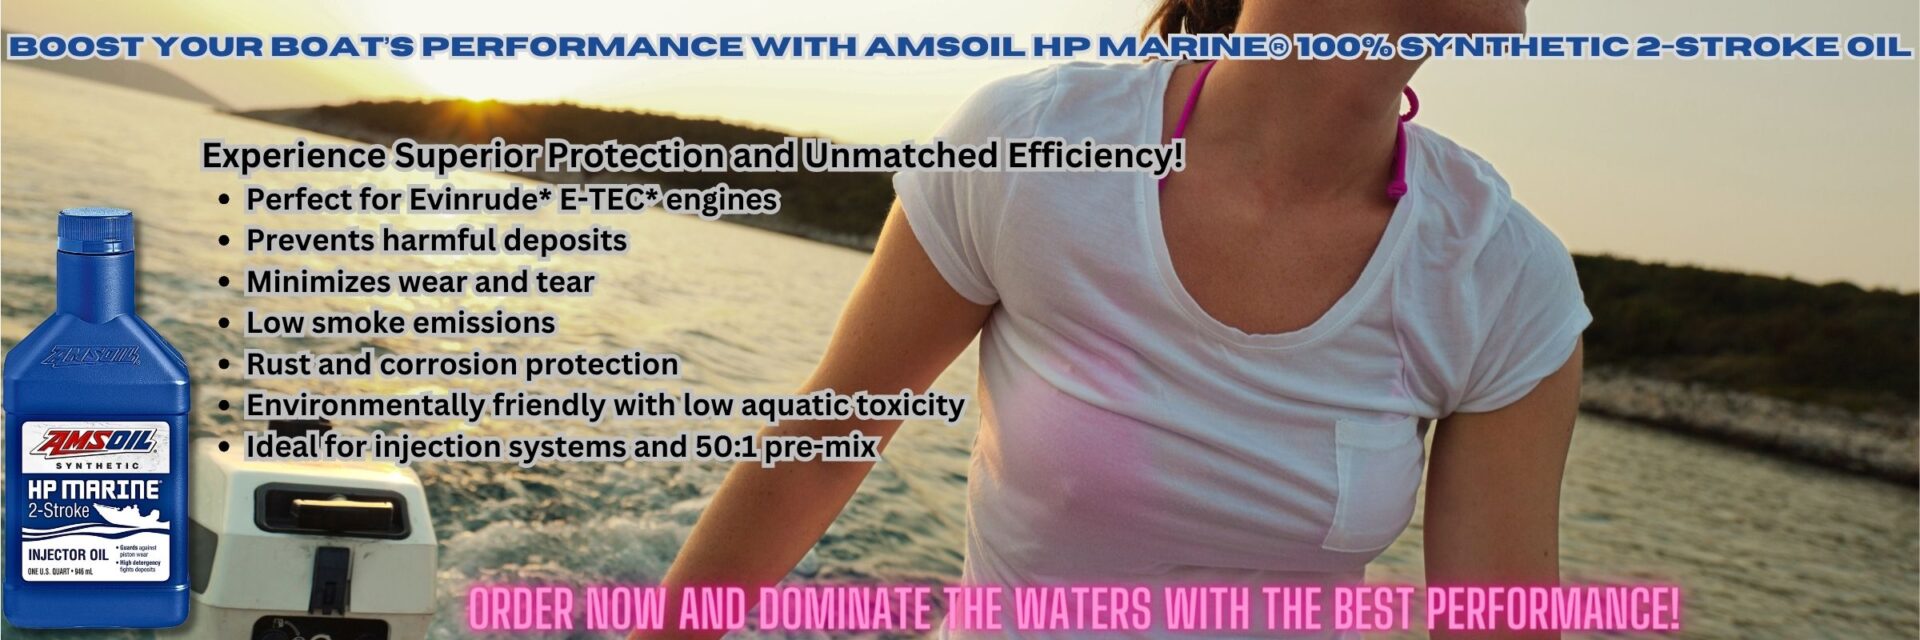 AMSOIL HP Marine® 100% Synthetic 2-Stroke Oil – Superior protection and performance for marine engines, ideal for Evinrude* E-TEC* engines, preventing deposits, reducing wear, and minimizing smoke emissions